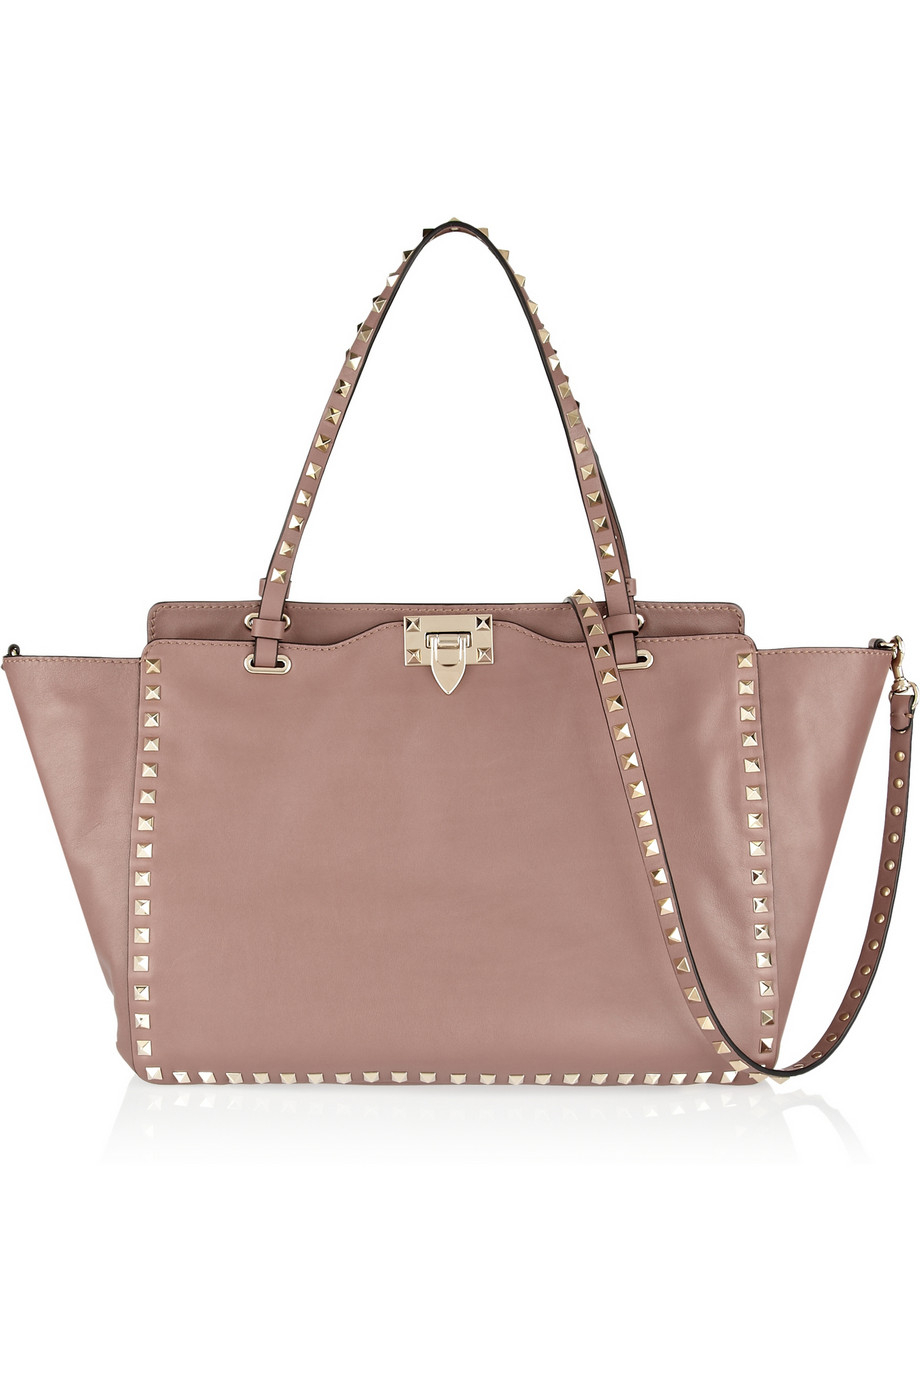 Lyst - Valentino The Rockstud Medium Leather Trapeze Bag in Pink